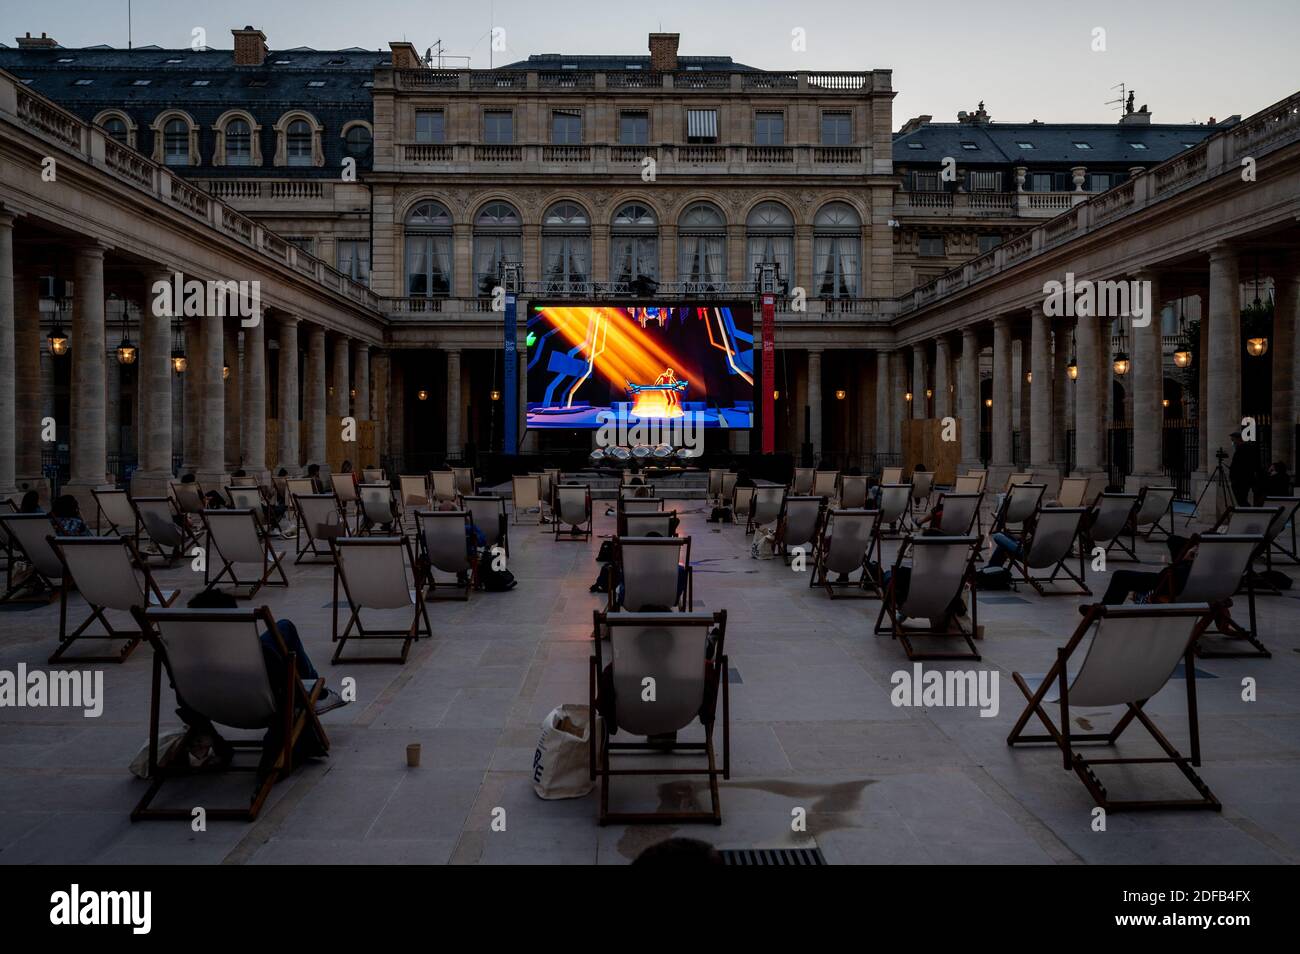 People attend first virtual reality live concert by Jean-Michel Jarre, in  the courtyard of Palais Royal, in Paris, France on June 21, 2020, as part  of celebrations of Music Day (or Fete